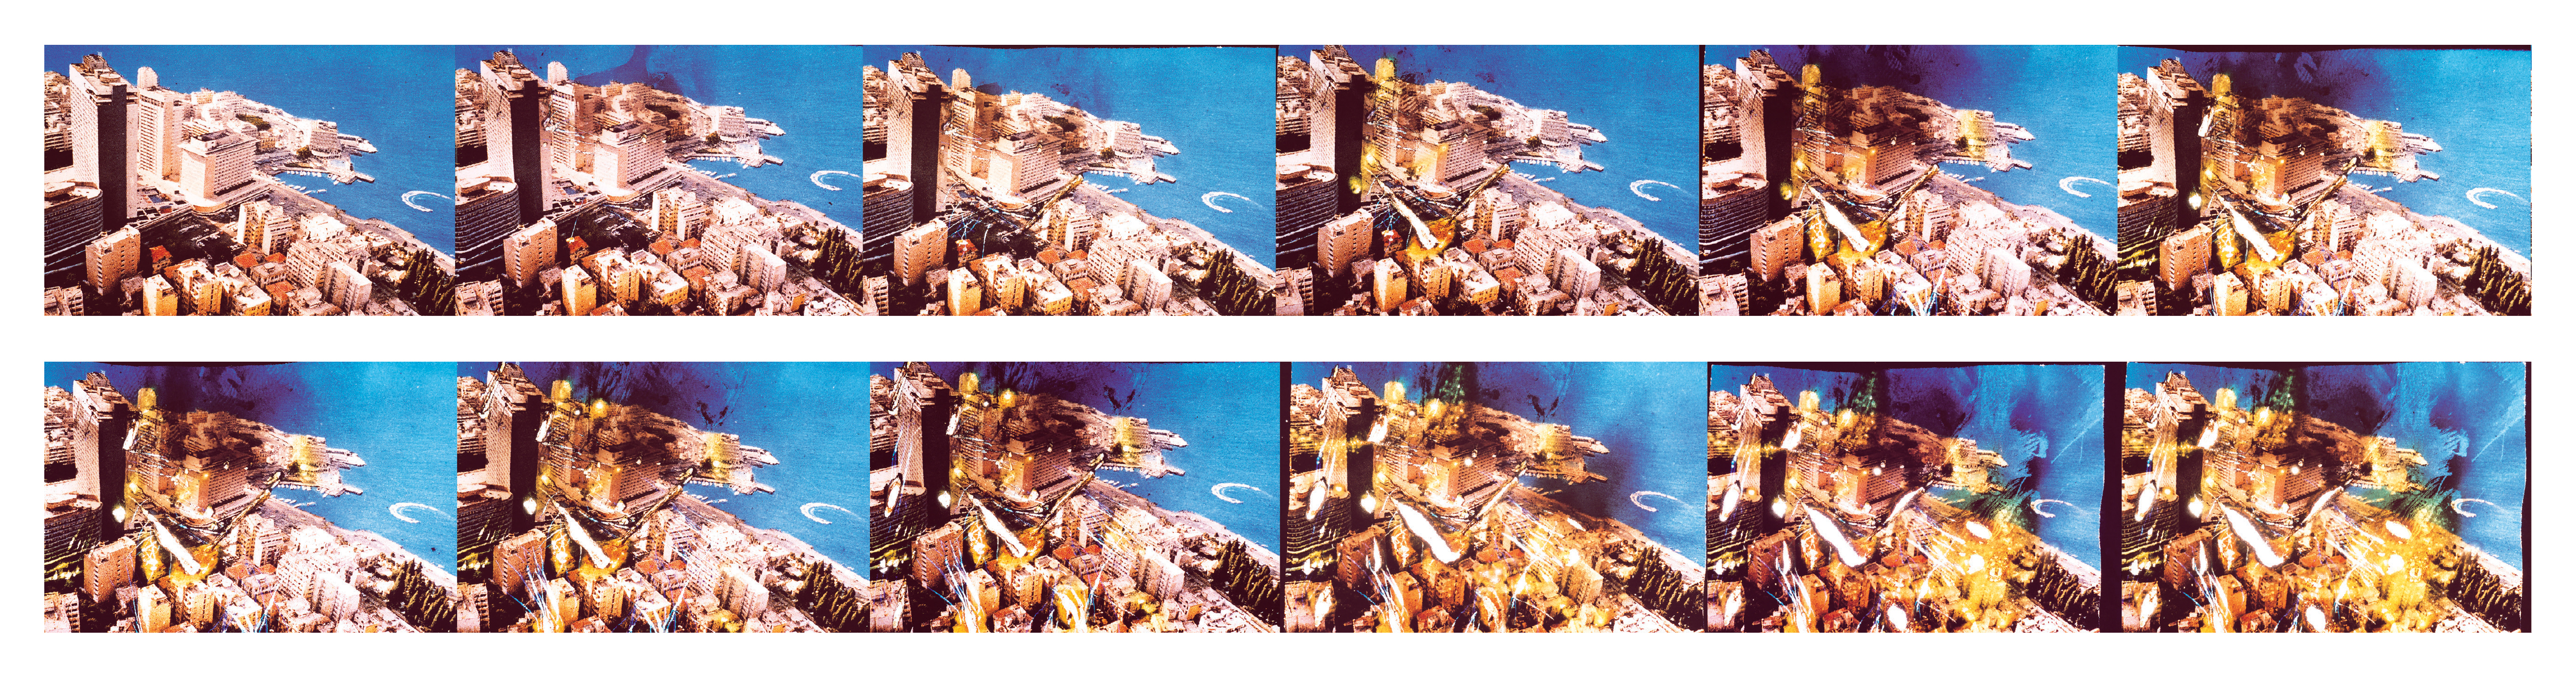 This postcard of “The Great Hotels of the Lebanese Riviera: The Saint Georges,” was taken by Abdallah Farah in June 1969 as a slide photograph and printed
in an edition of 15,000. Five thousand copies of the card were reprinted in November 1974. The slide was burned by Farah in step with the destruction of the hotels after December 1975 when a new phase of the battle began with the Christian Kataebs in the Holiday Inn and the Phoenicia fighting the pan-Arab leftist coalition who took over the Saint Georges Hotel (facing the Holiday Inn) while still also at the Murr Tower. On the first day of this battle, more than
60 people were killed in Beirut. The slide was burnt again on Wednesday, 21 January 1976, after a battle involving tanks, armored cars, and heavy artillery in sector IV.